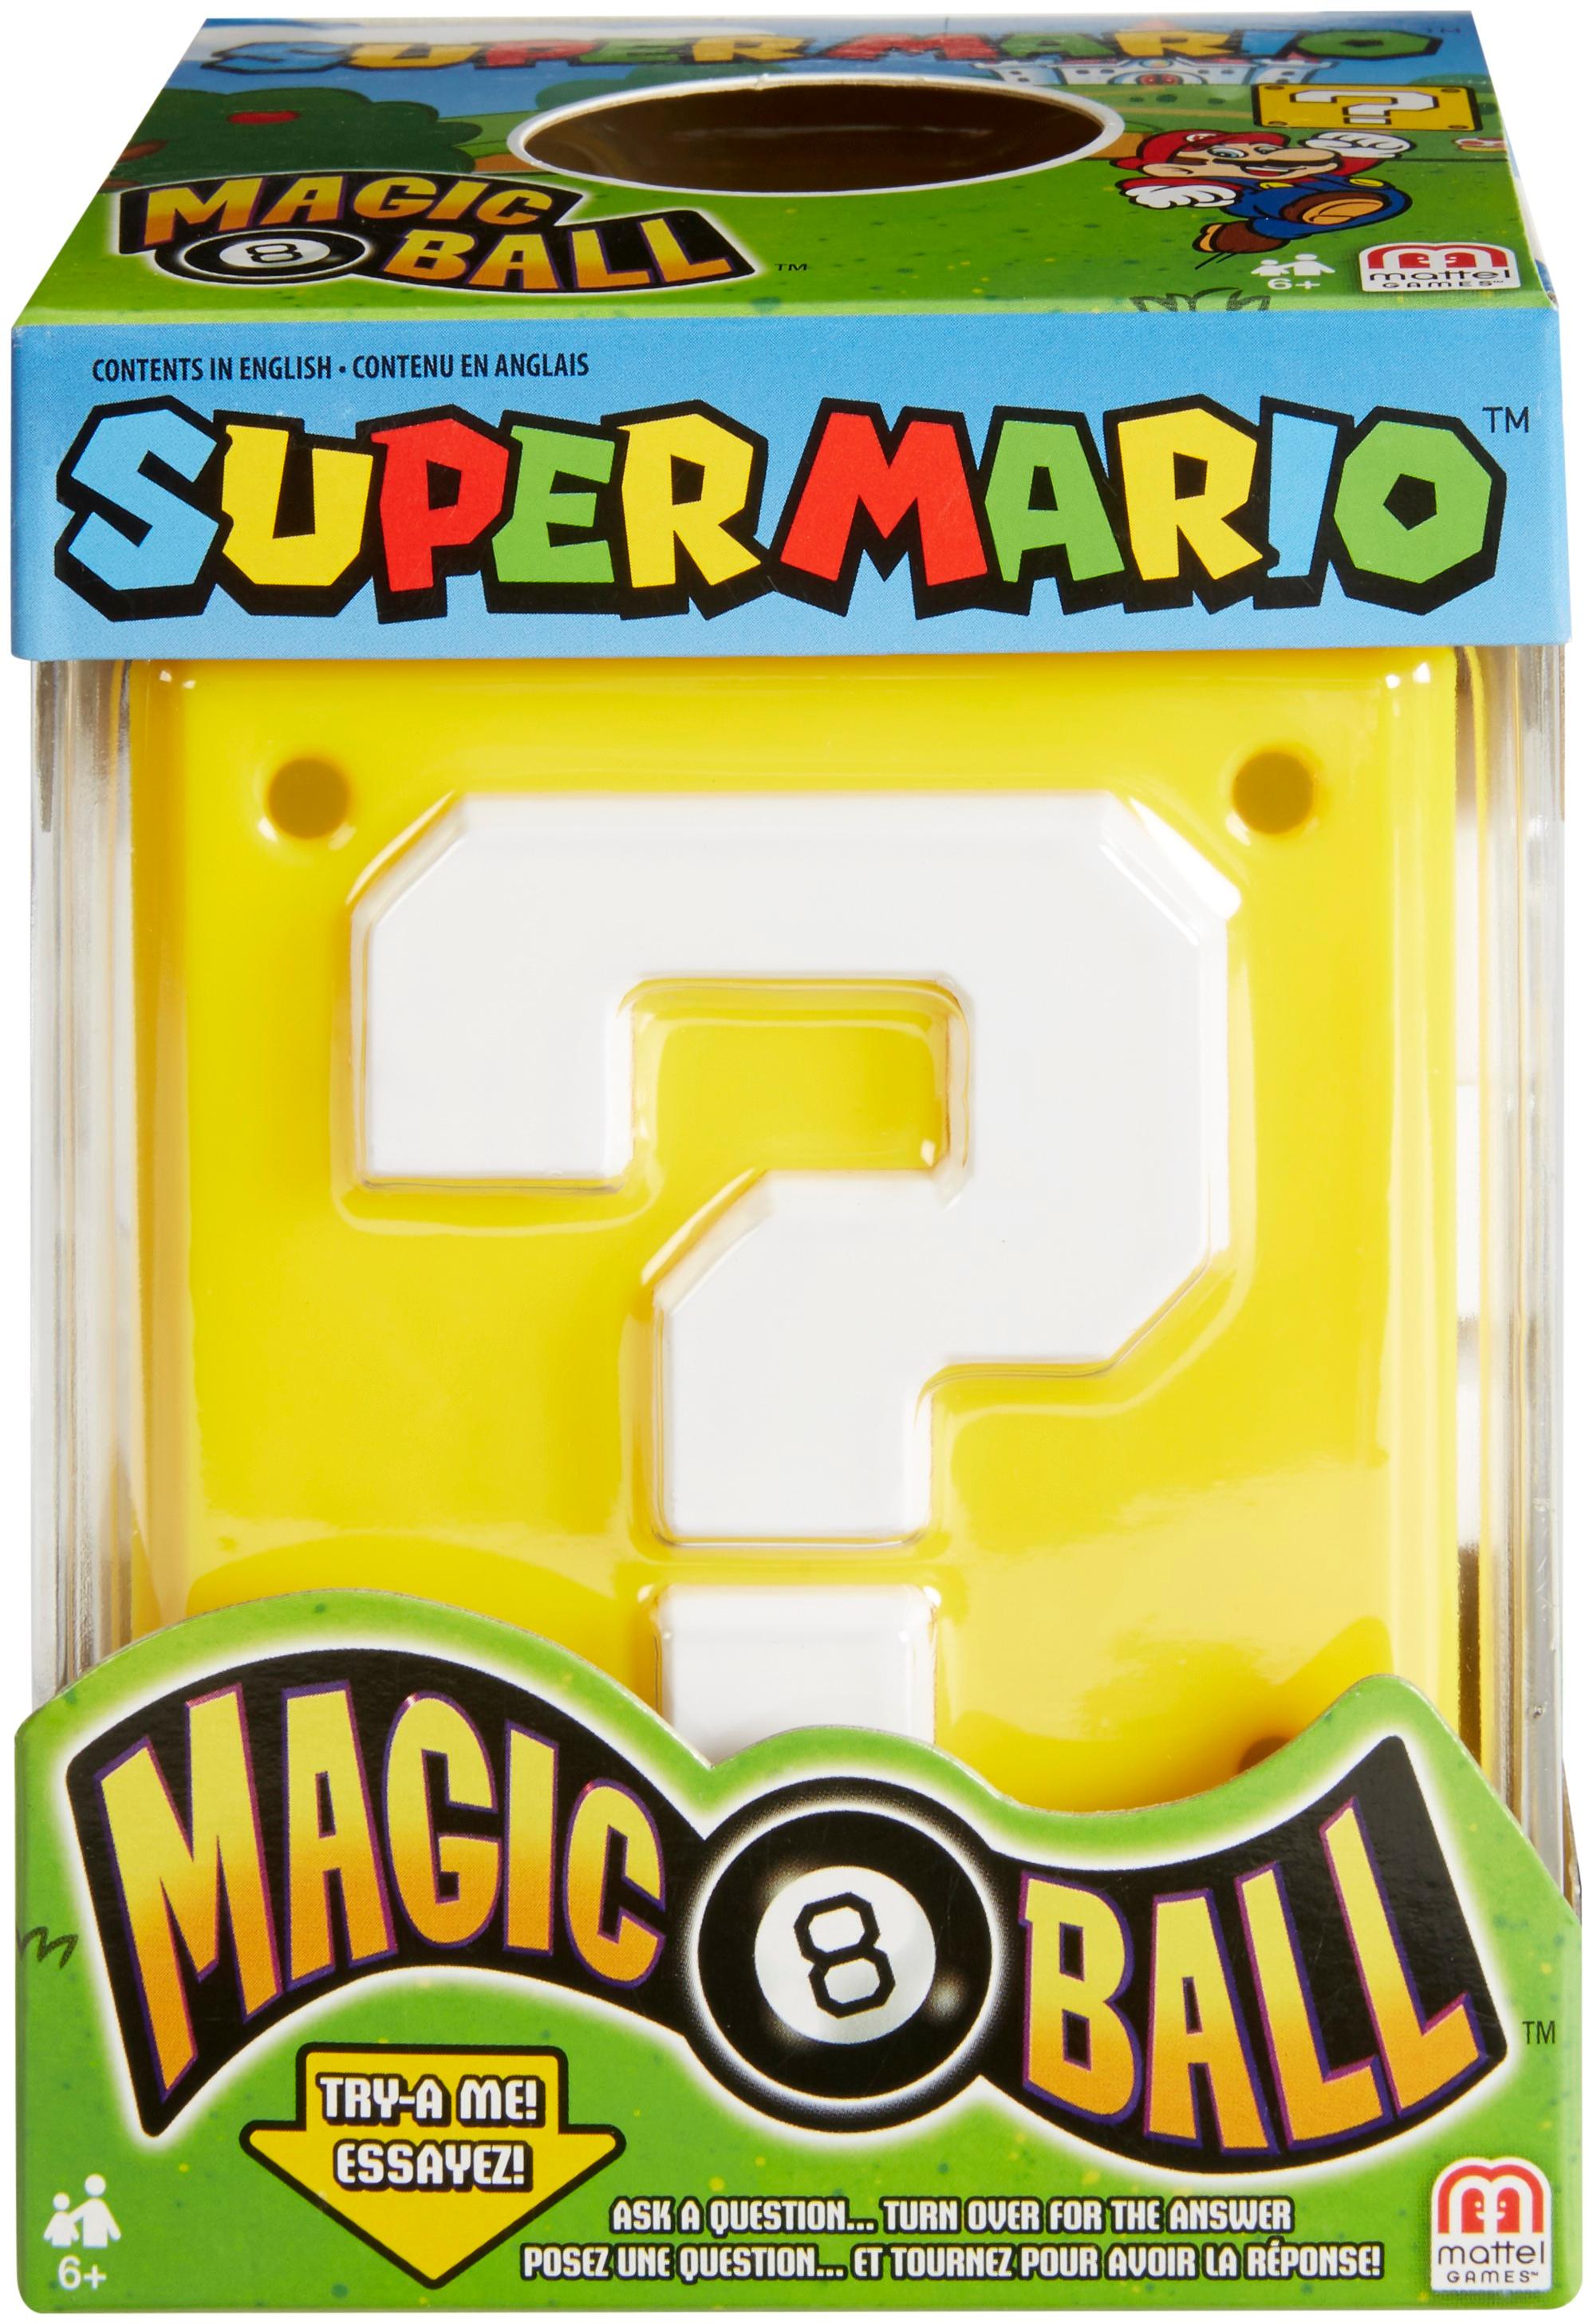 Toy Reviews - Magic 8 Ball - The Toy Insider